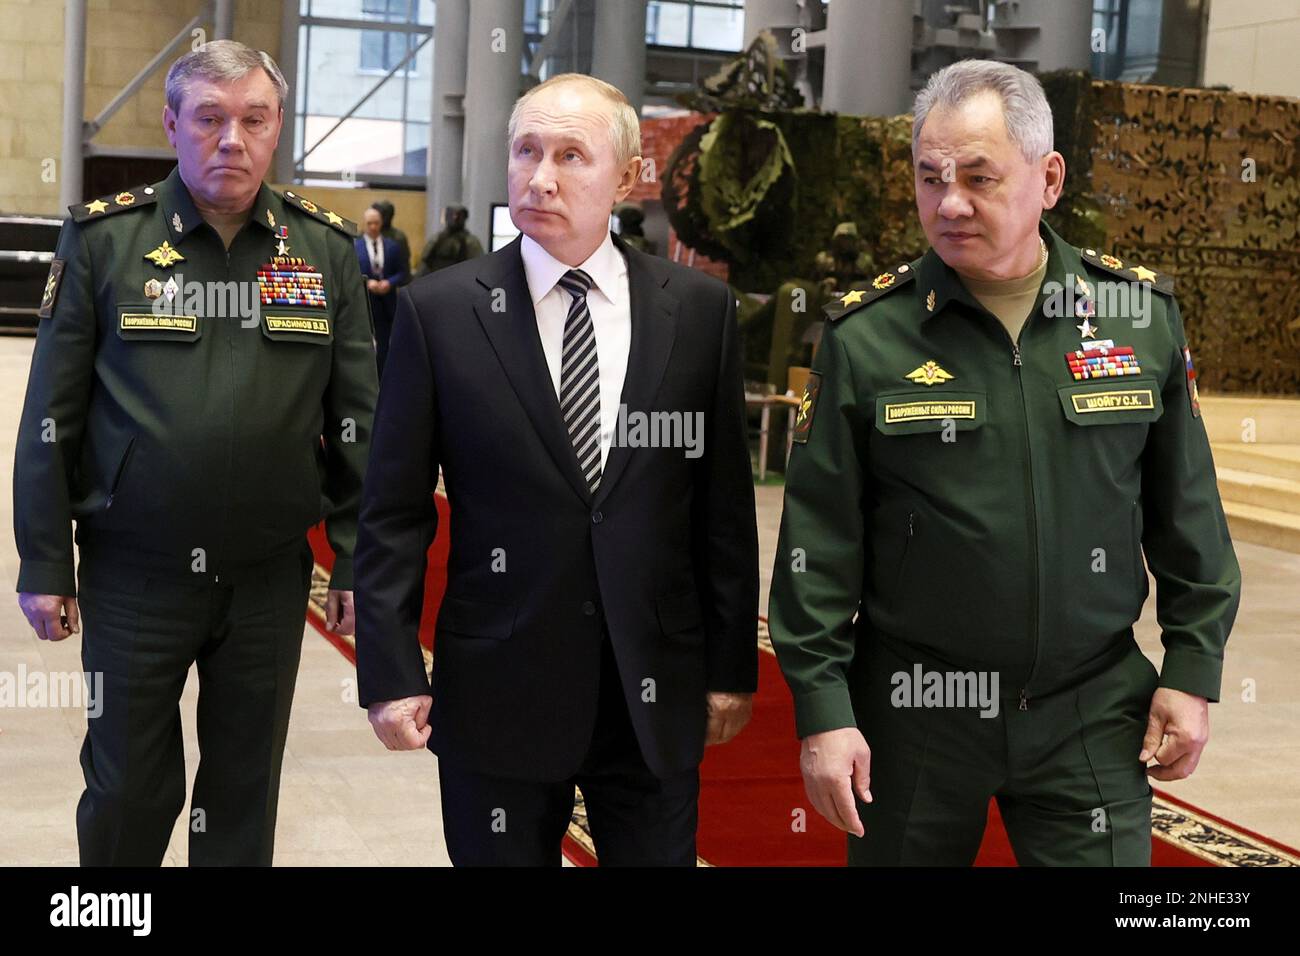 FILE - Russian President Vladimir Putin, center, escorted by Russian Defense Minister Sergei Shoigu, right, and General Staff Valery Gerasimov walk after attending an extended meeting of the Russian Defense Ministry Board at the National Defense Control Center in Moscow, Russia, Tuesday, Dec. 21, 2021. As Russian troops wage a ferocious house-to-house fight for control of strongholds in eastern Ukraine, a parallel battle is unfolding in the top echelons of military power in Moscow, with President Vladimir Putin reshuffling his top generals while rival camps try to win his favor. (Mikhail Metze Stock Photo